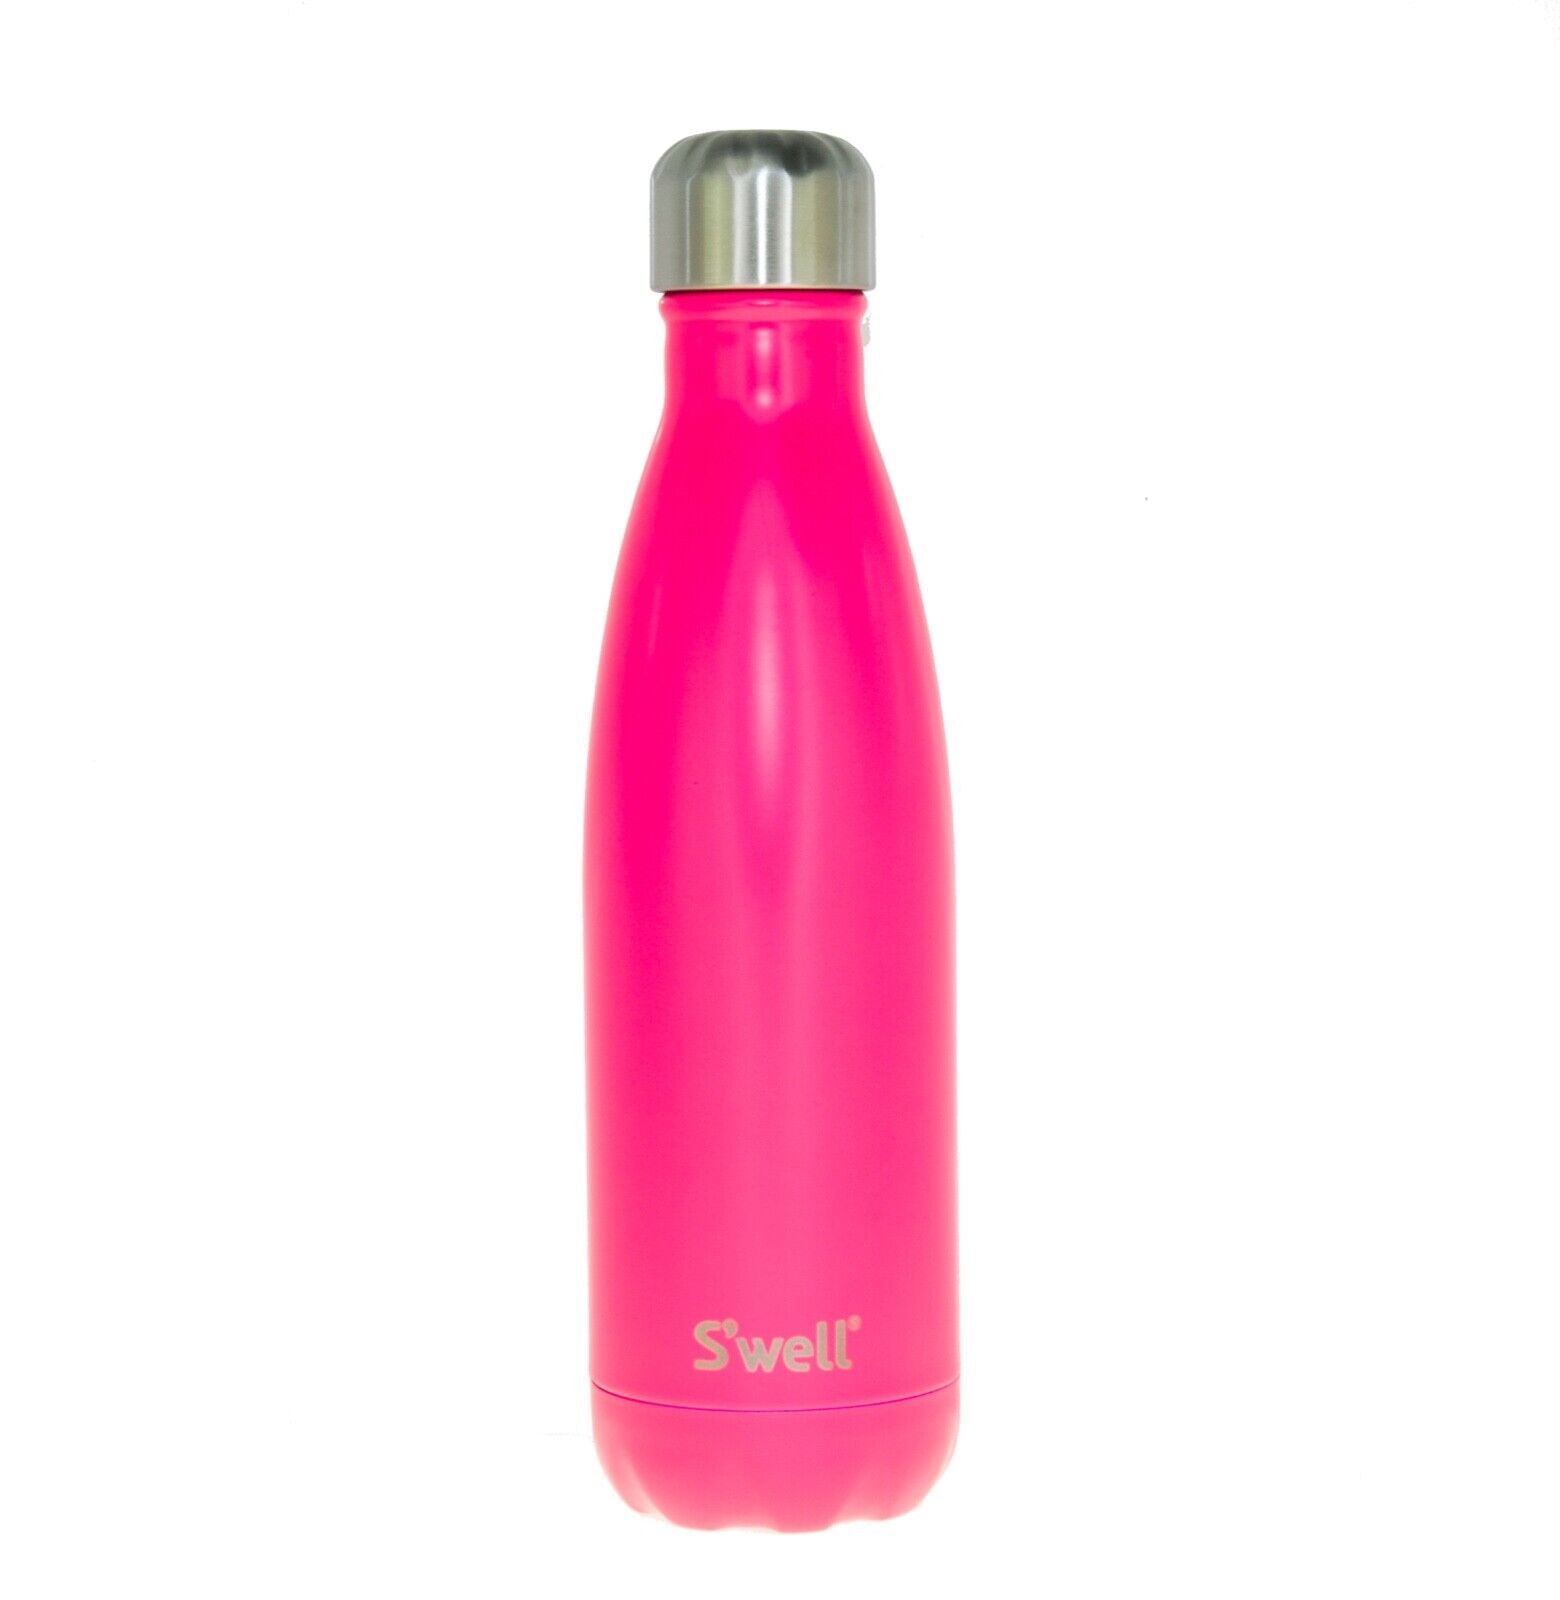 Primary image for Starbucks Swell 17 Oz Water Bottle Hot Pink Stainless Steel Thermos Double Wall